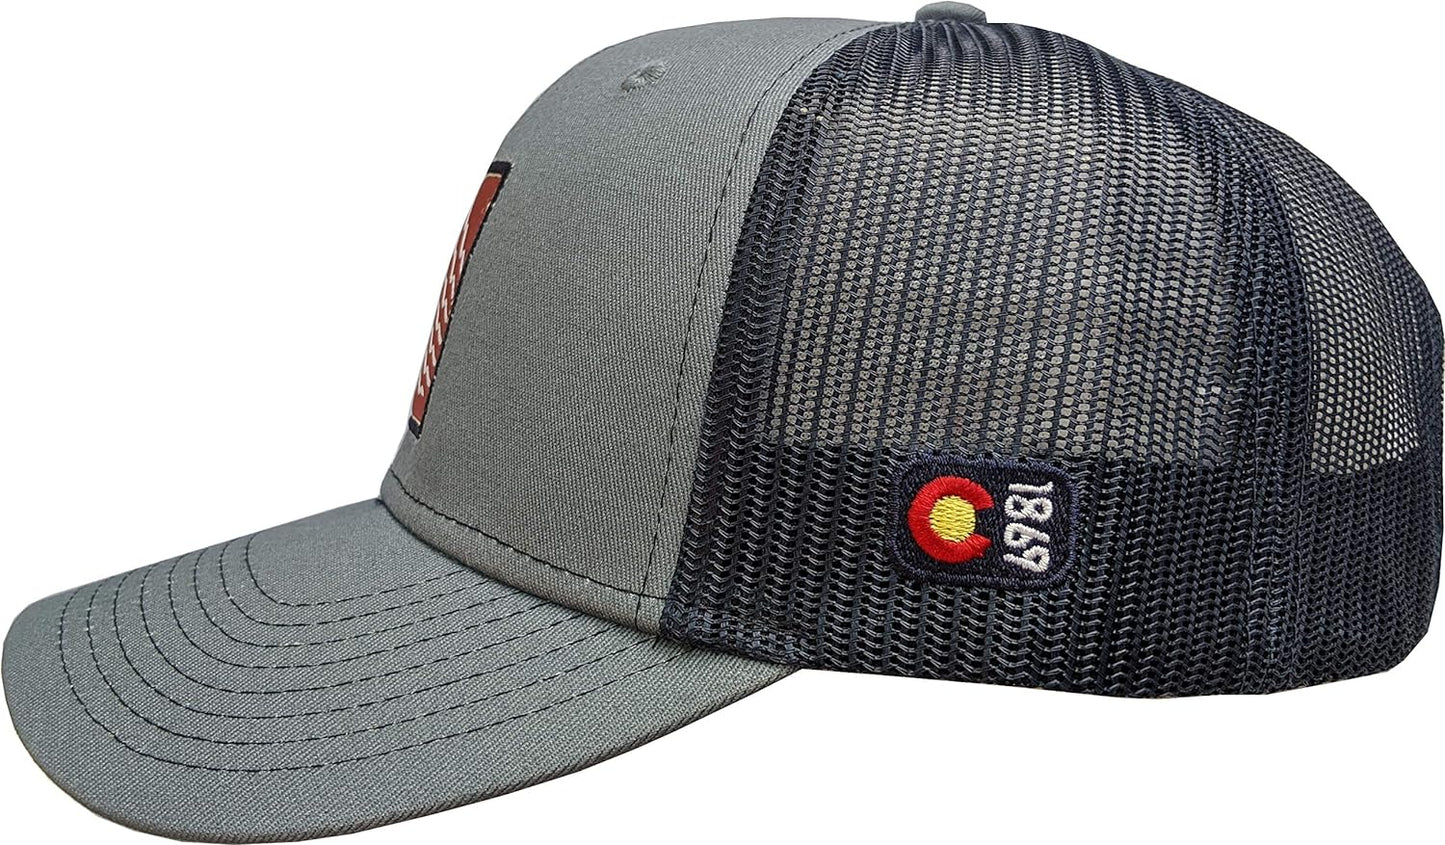 Adventure-Ready Trucker Hat - Mountains Series | Stay Cool & Protected Outdoors